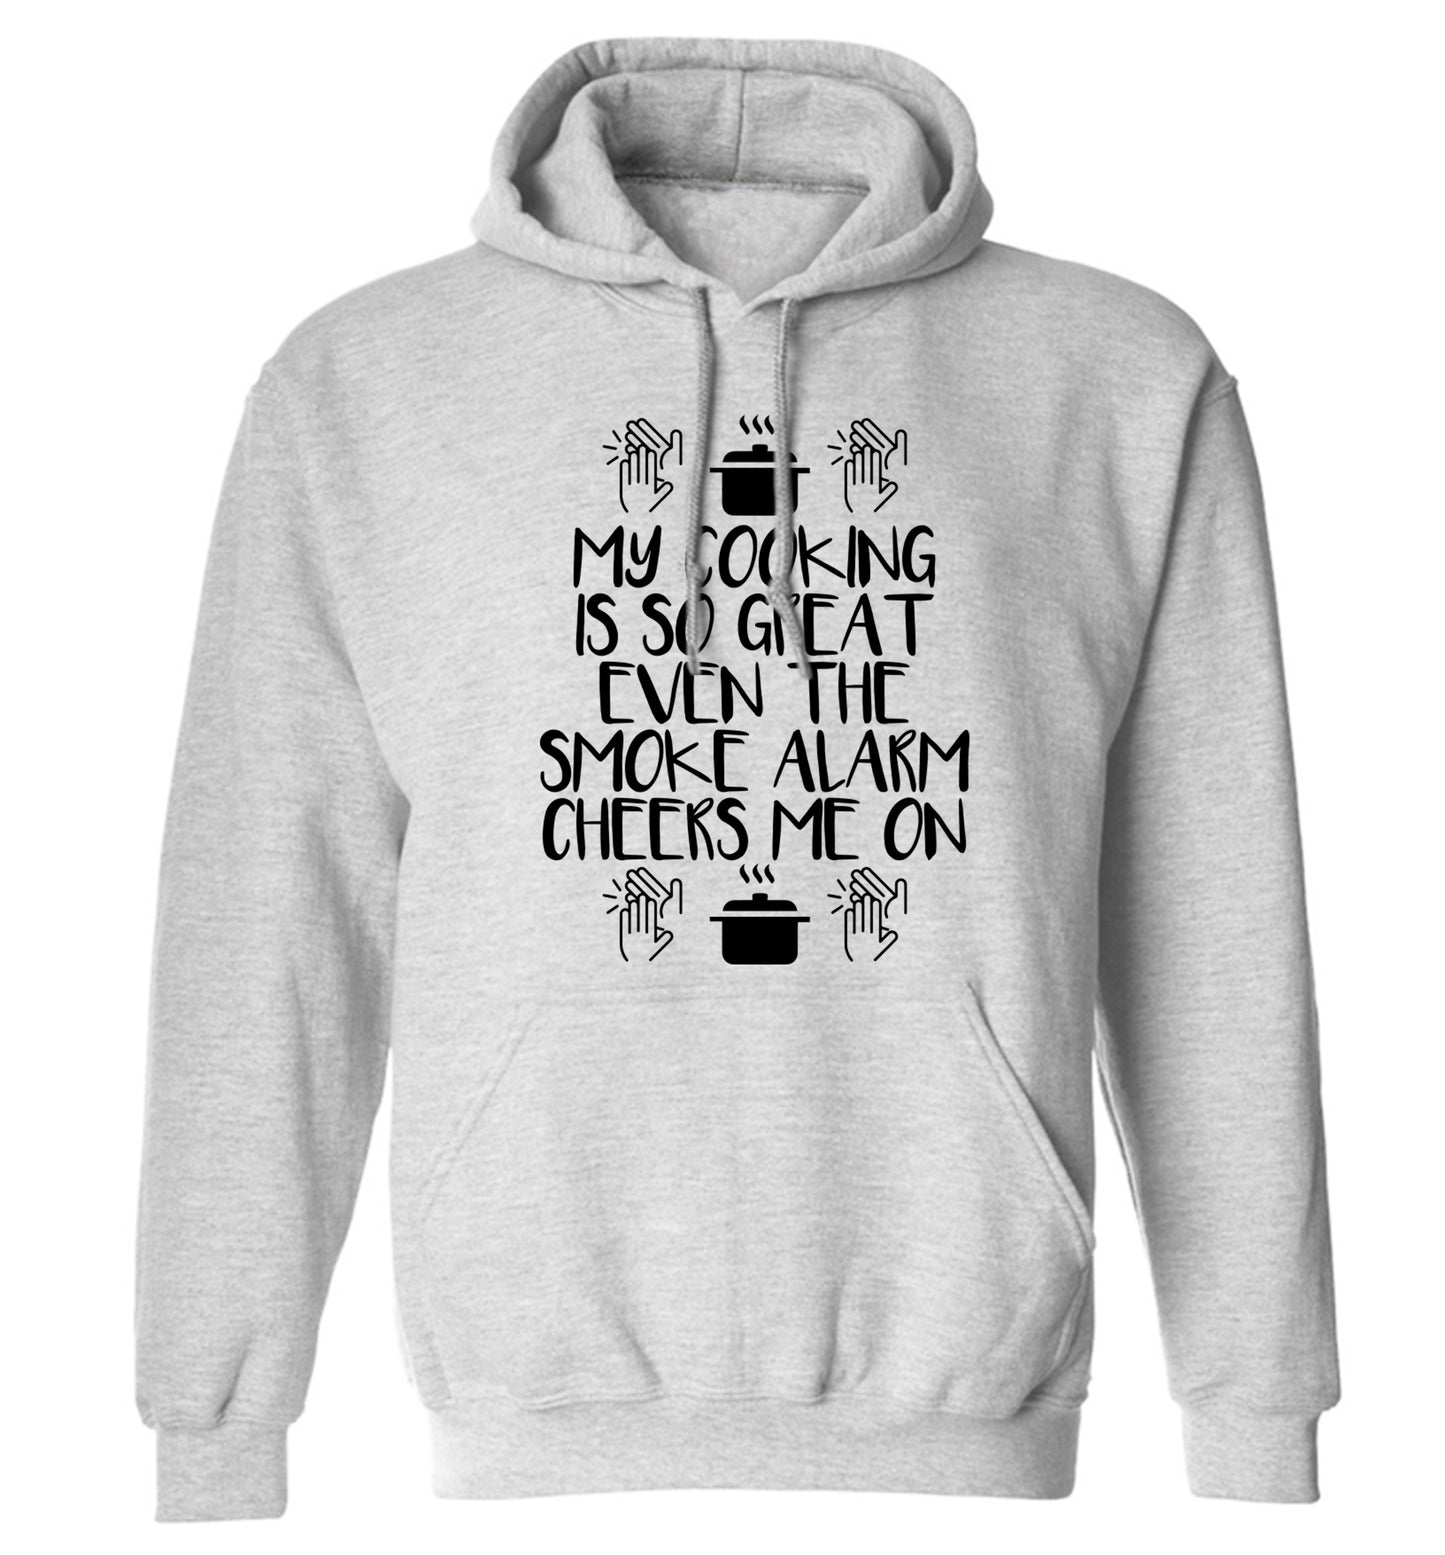 My cooking is so great even the smoke alarm cheers me on! adults unisex grey hoodie 2XL